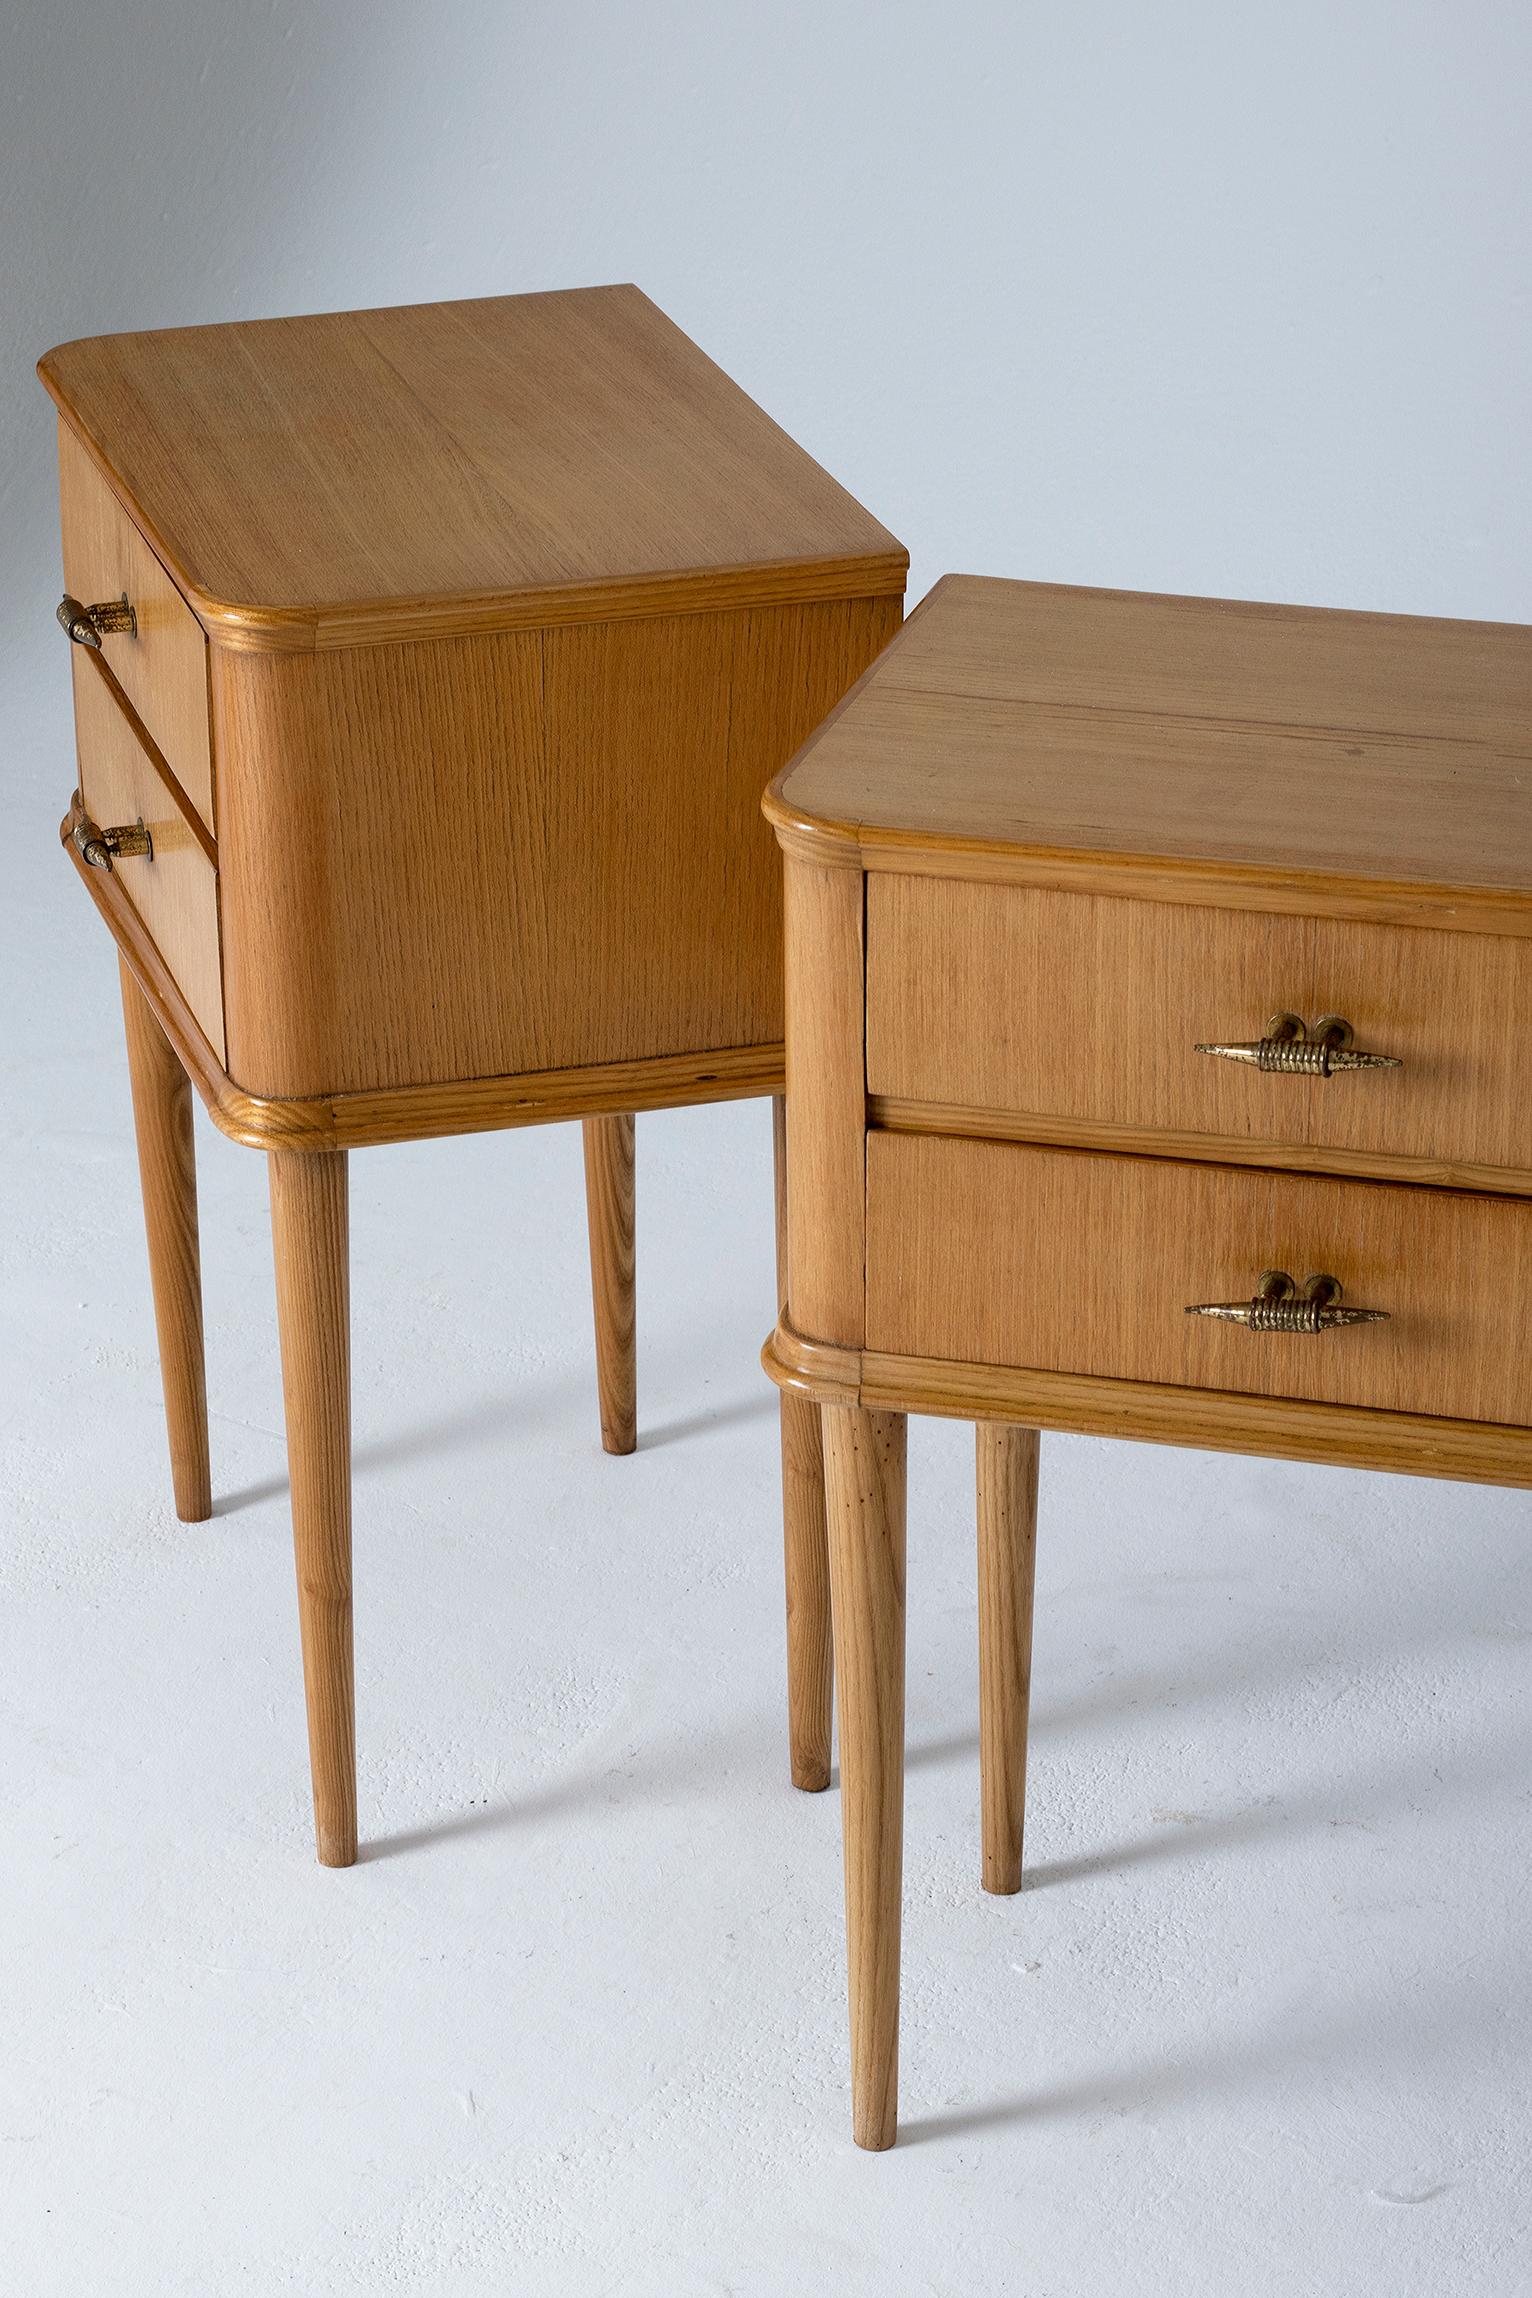 20th Century Pair of 1940s Oak Bedside Tables